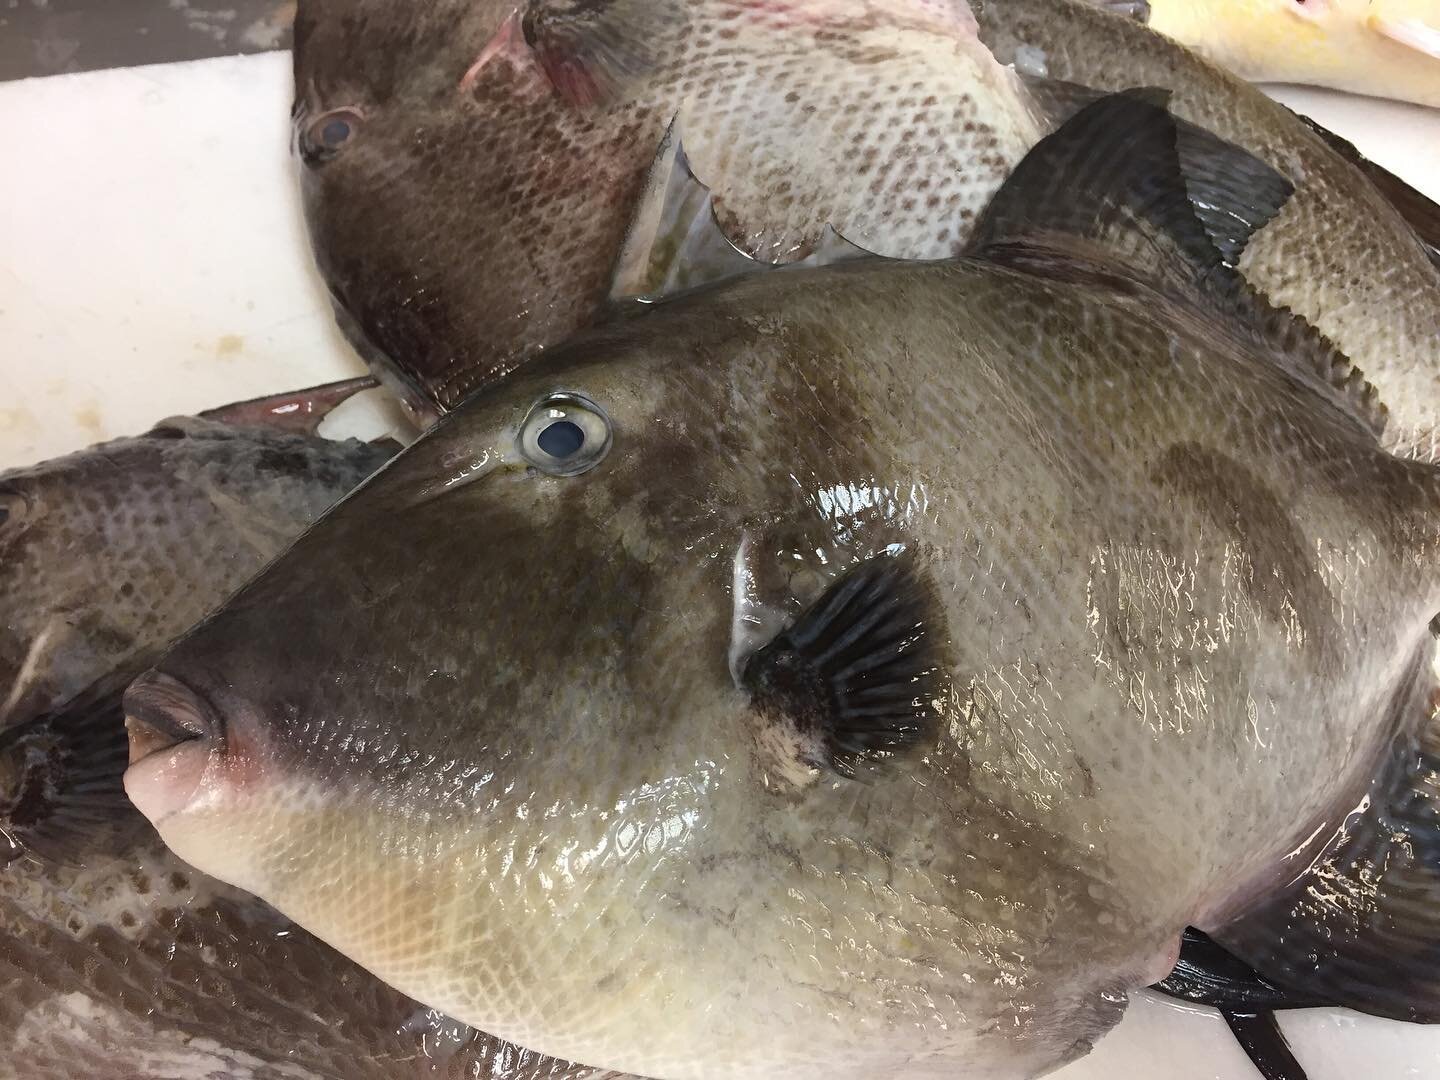 Nc triggerfish in today @ seaproductsnc.com